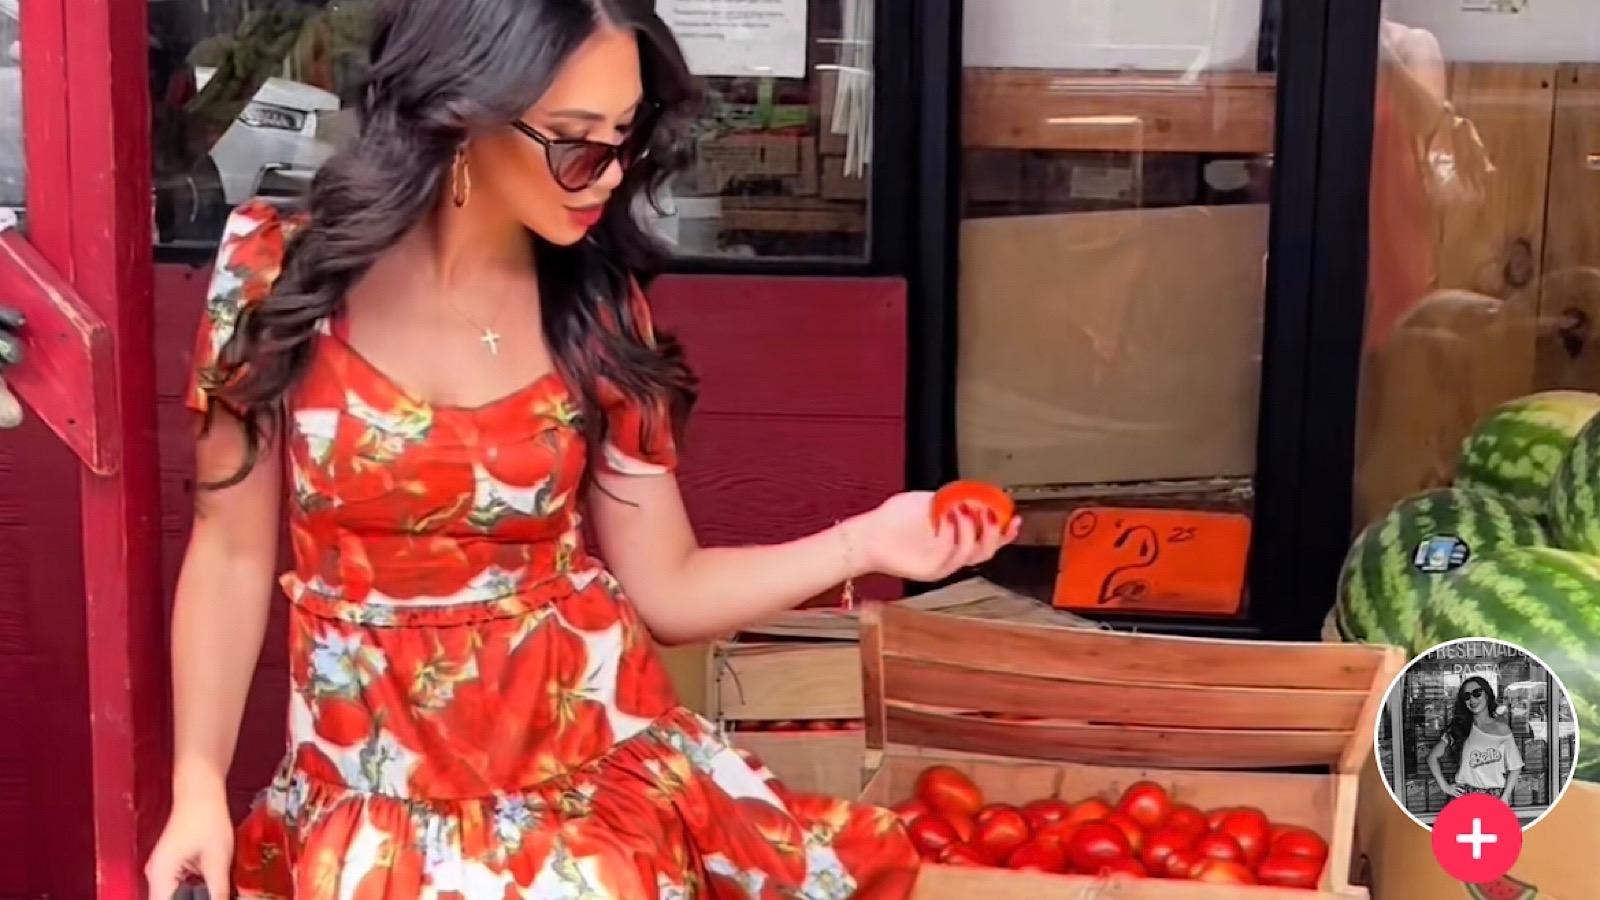 TikToker shares her fashionable tomato girl summer attire while posing with the tasty red fruit.